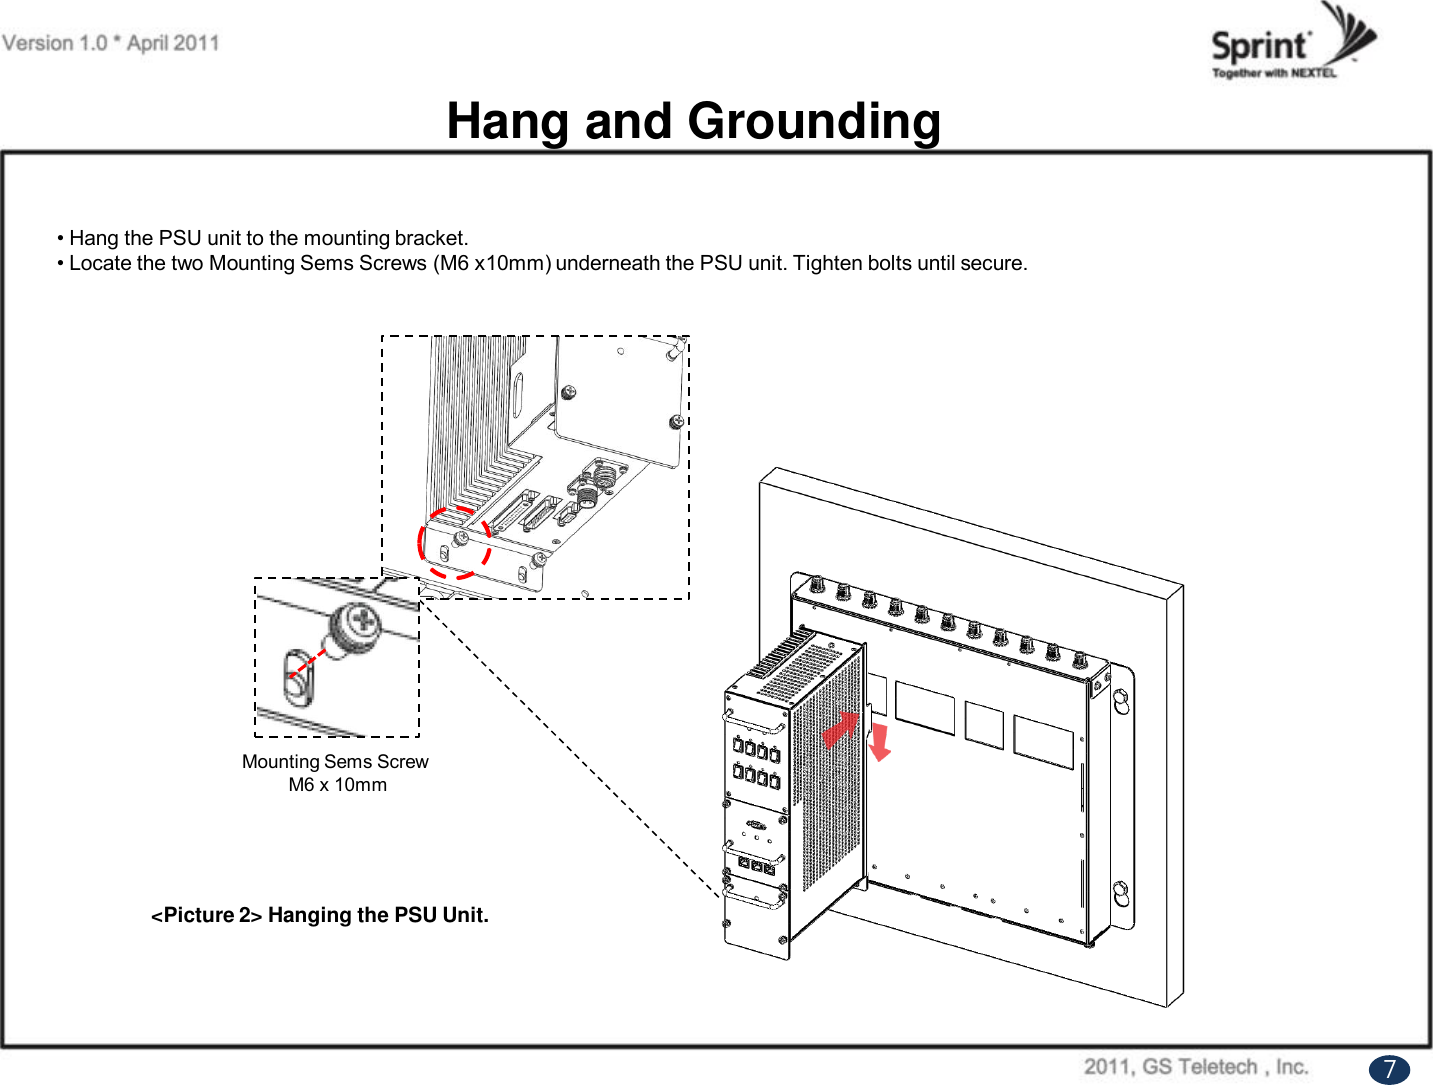 Hang and Grounding&lt;Picture 2&gt; Hanging the PSU Unit. • Hang the PSU unit to the mounting bracket.• Locate the two Mounting Sems Screws (M6 x10mm) underneath the PSU unit. Tighten bolts until secure.Mounting Sems Screw M6 x 10mm7